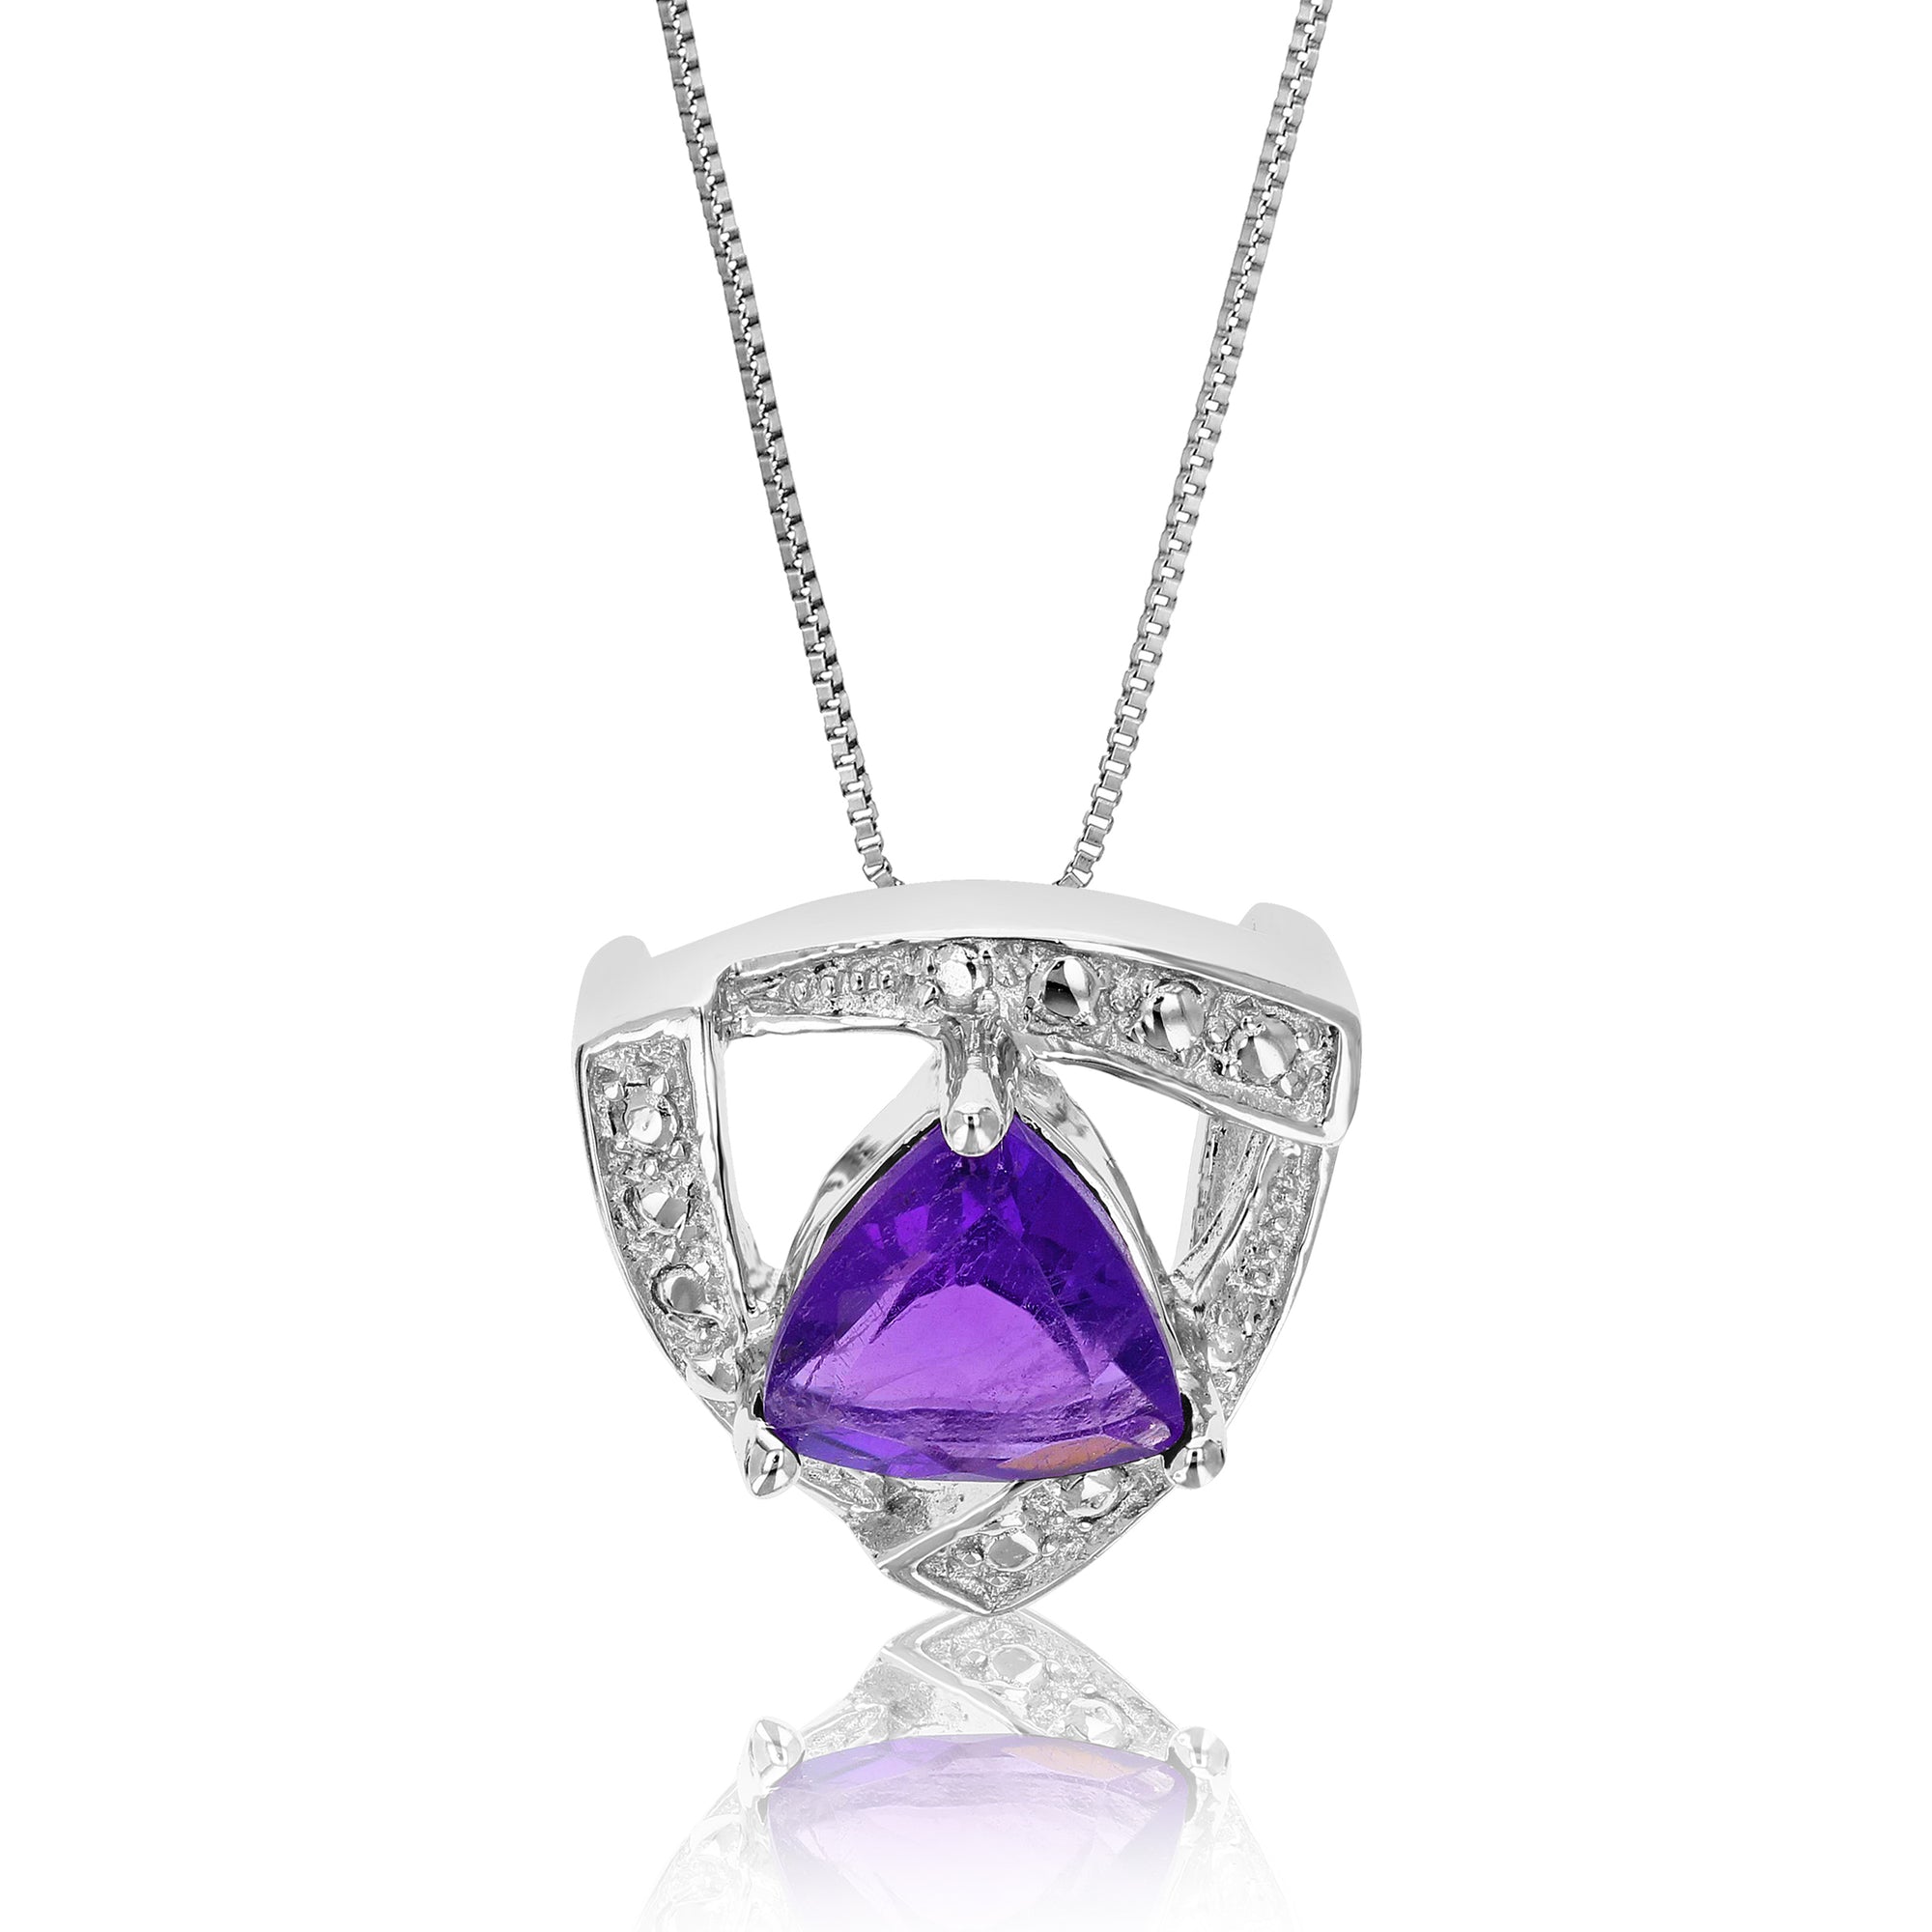 1 cttw Pendant Necklace, Purple Amethyst Trillion Shape Pendant Necklace for Women in .925 Sterling Silver with Rhodium, 18 Inch Chain, Prong Setting